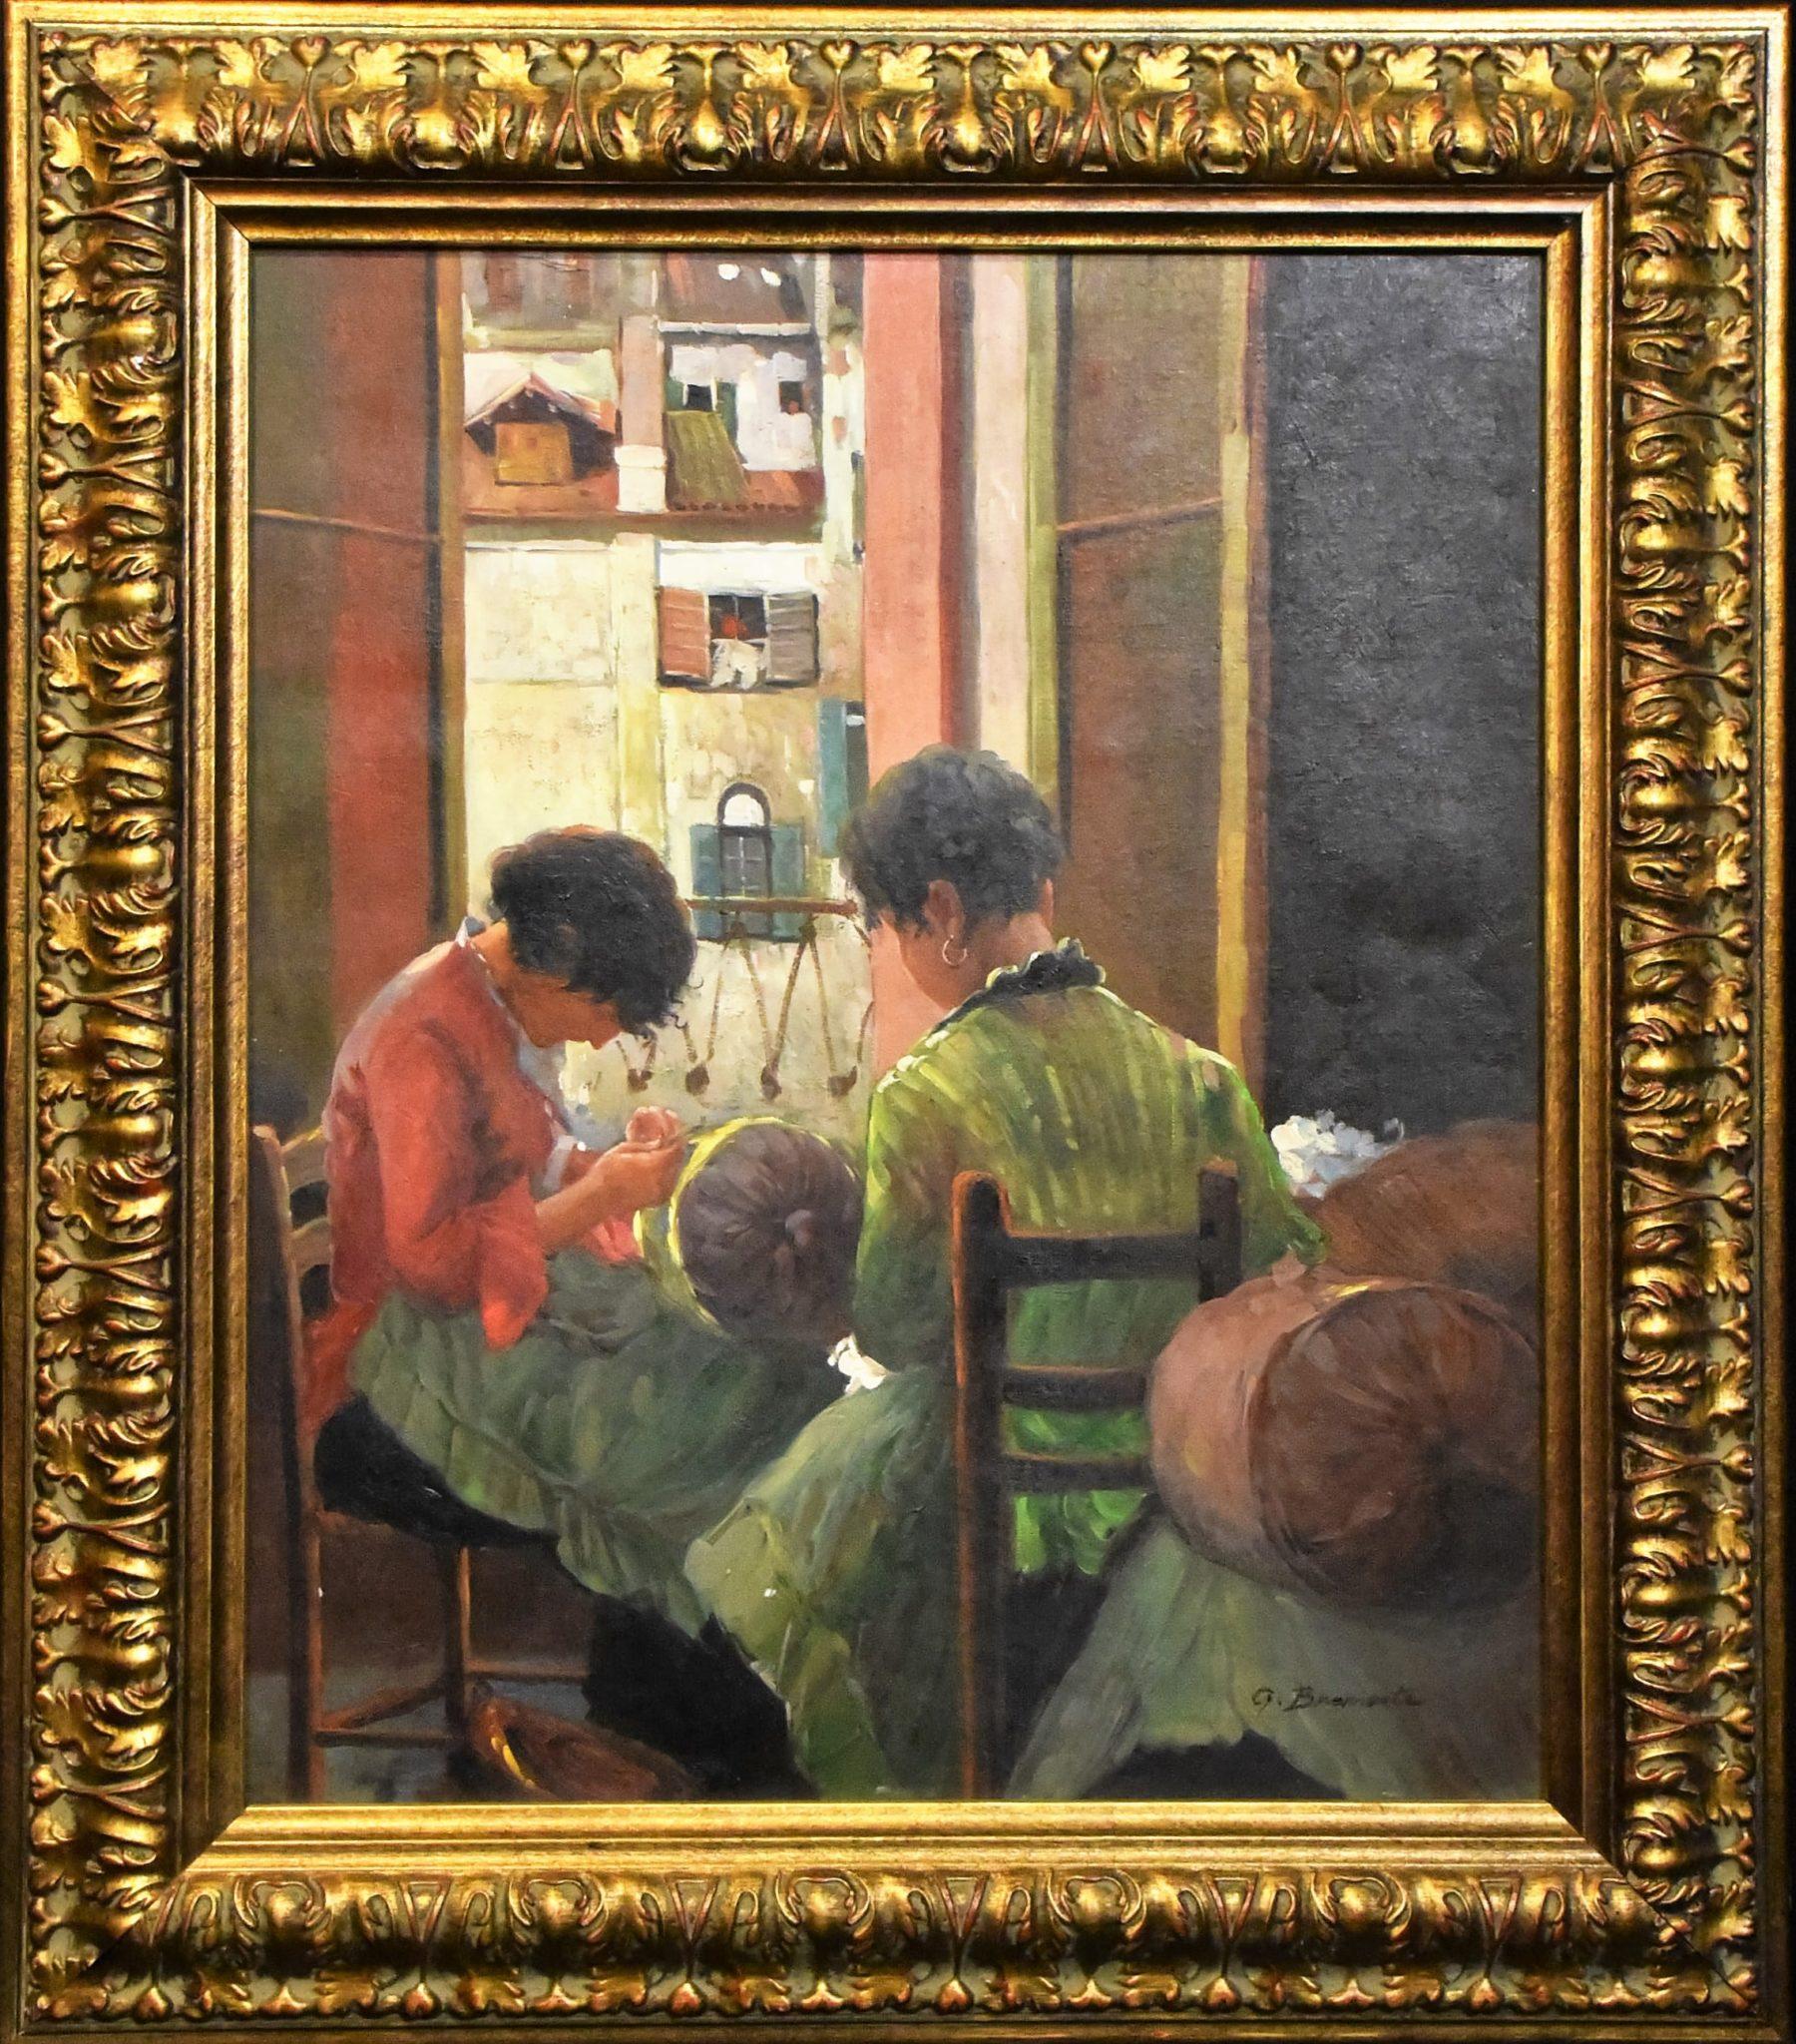 Girls Sewing - George Bramanta Original Oil on archival canvas. Hand signed by the artist. One of a kind. Includes certificate of authenticity. Custom framed. Approx. 24x30.